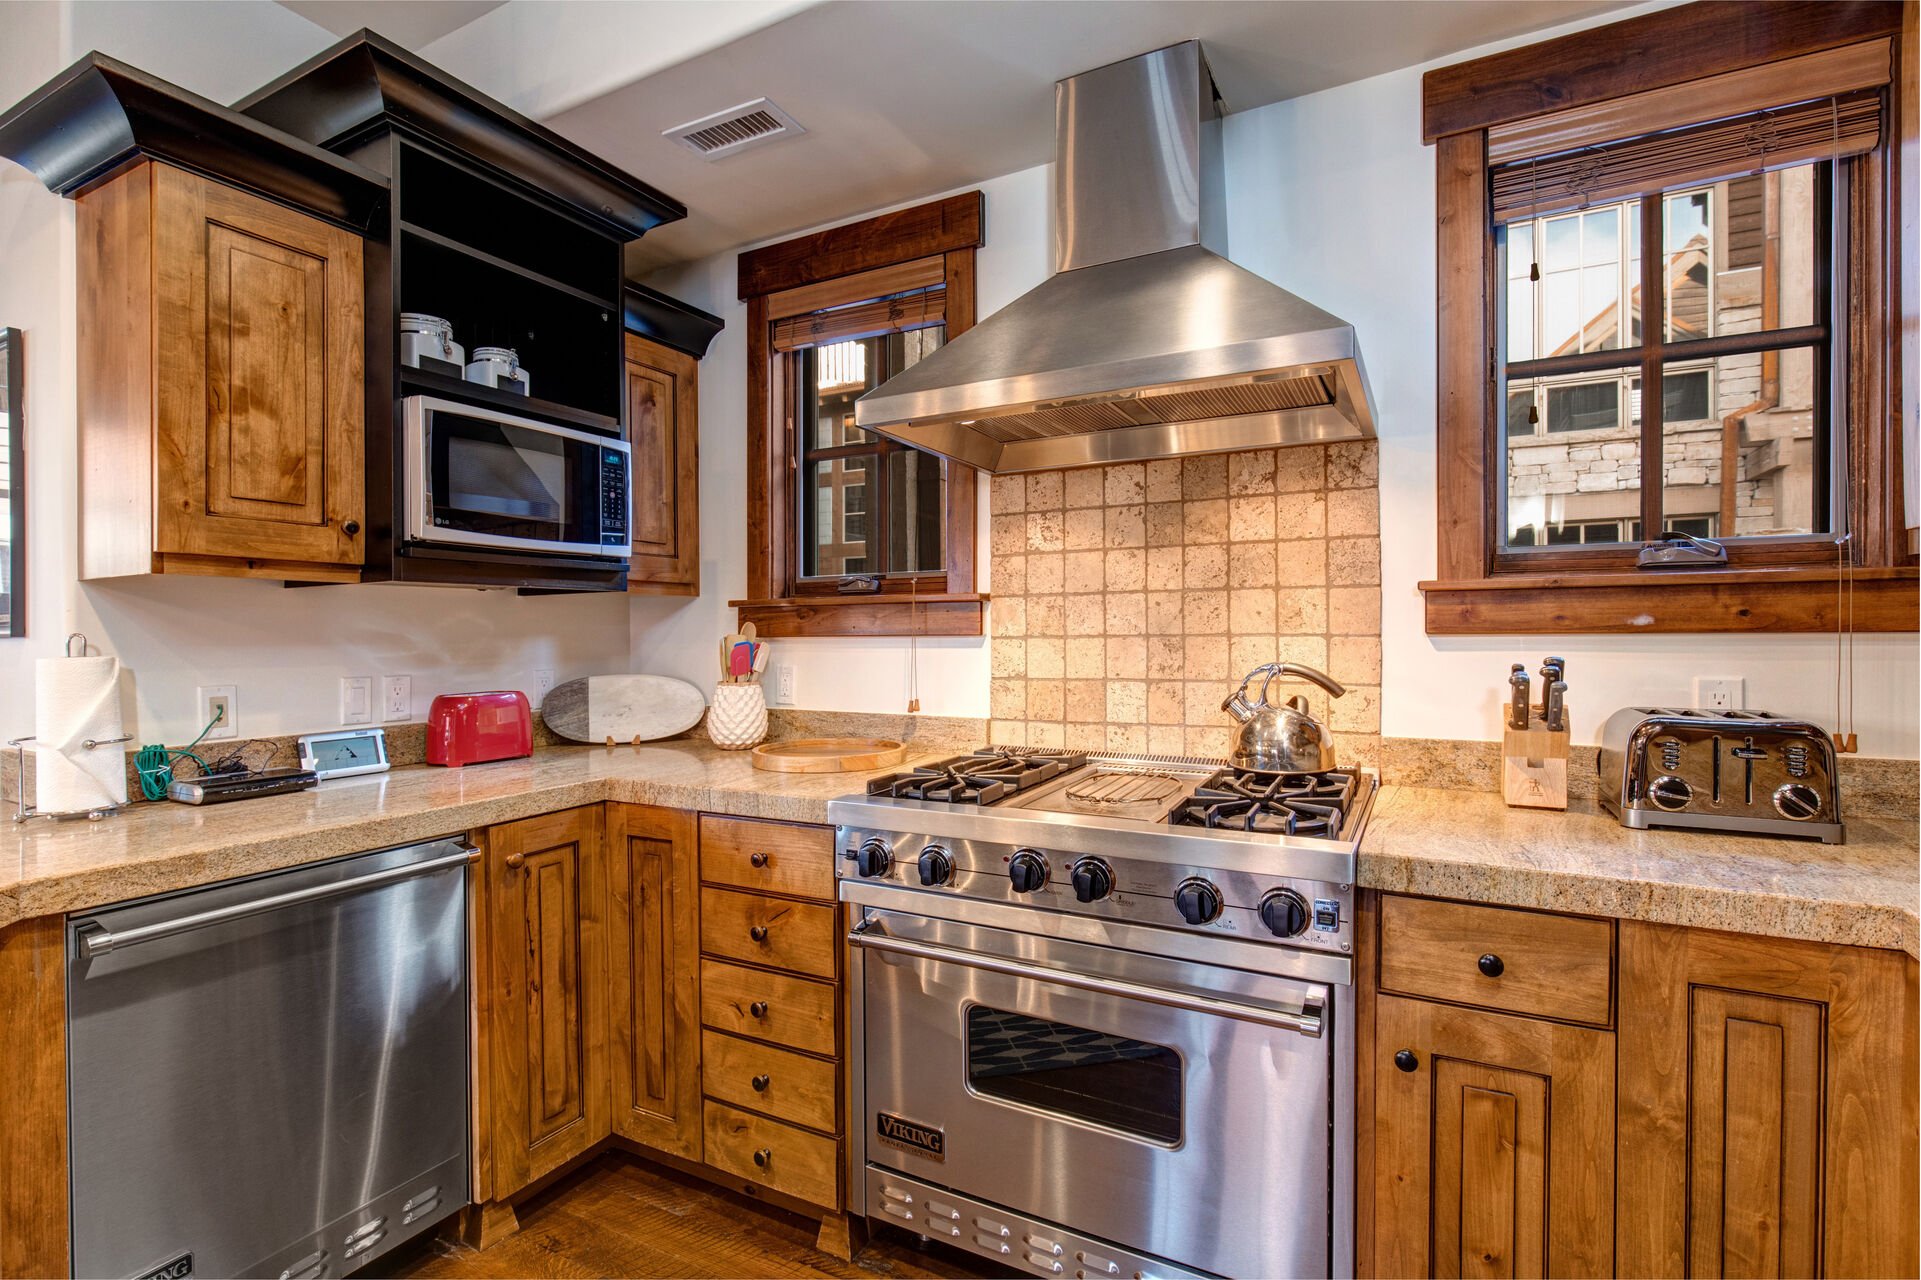 Gourmet Kitchen with Viking Stainless Steel Appliances Including a 4-Burner Gas Range with a Griddle and Convection Oven